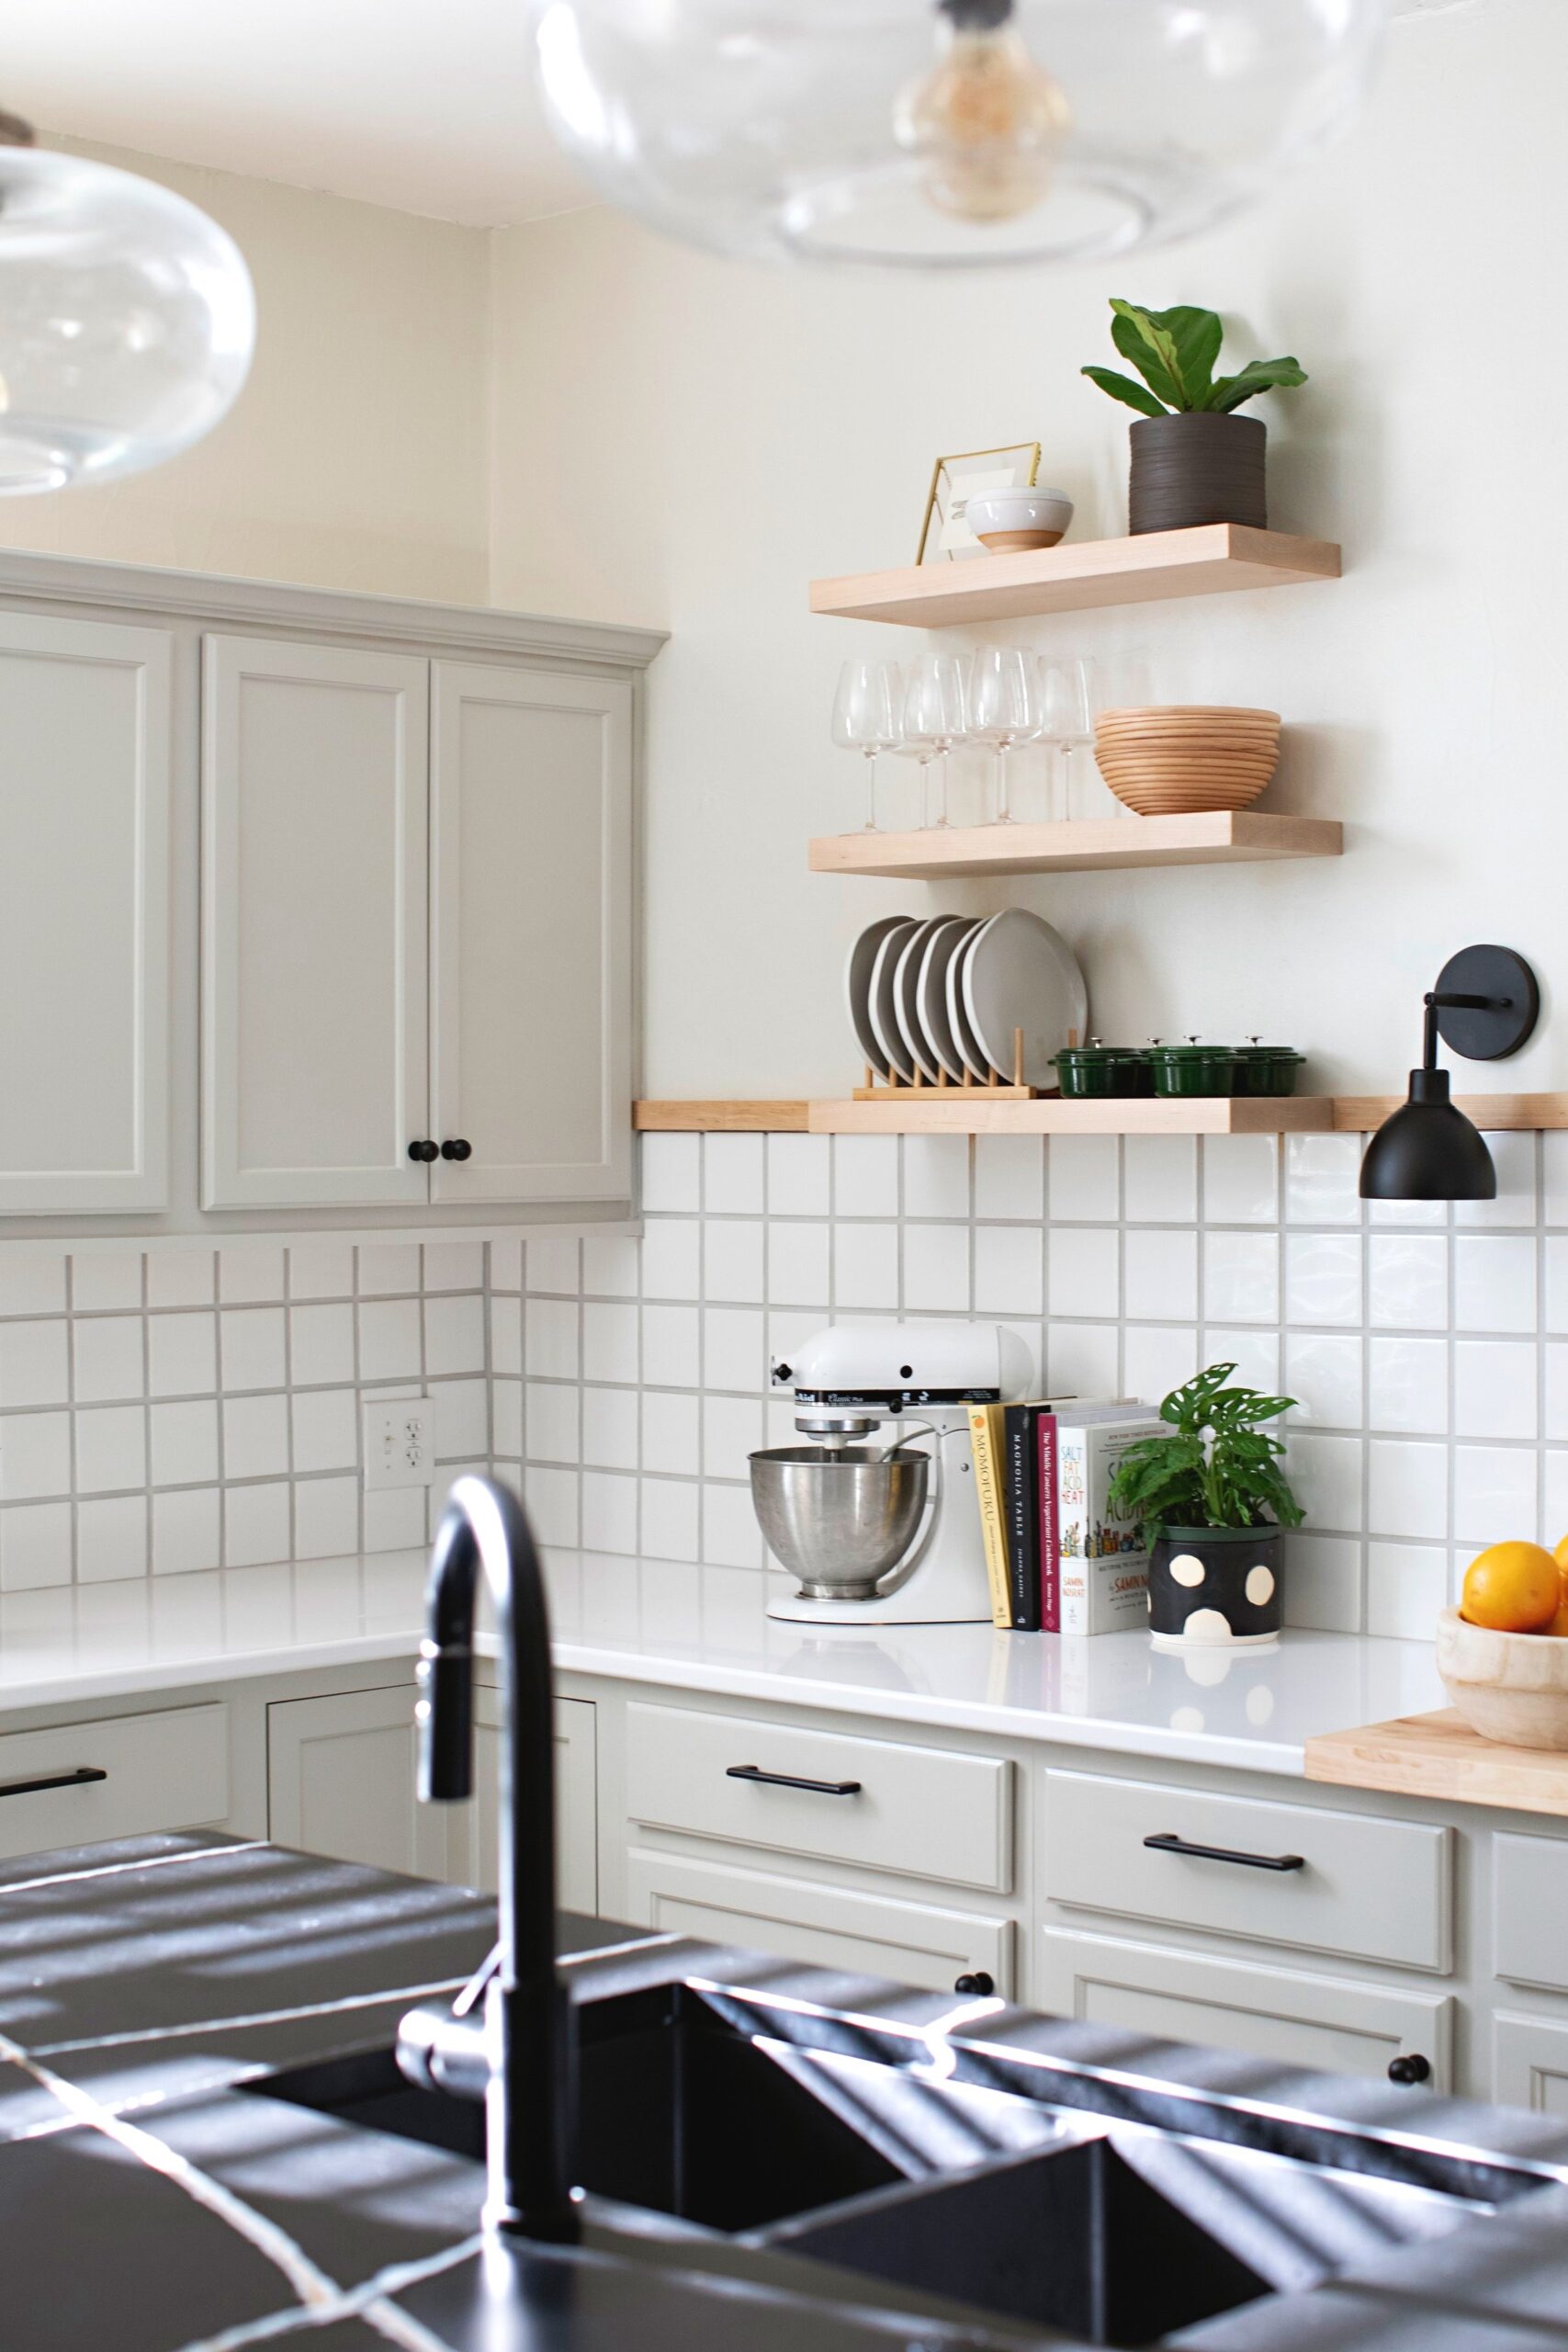 An Interior Designer’s How-To Guide for Renovating Your Kitchen